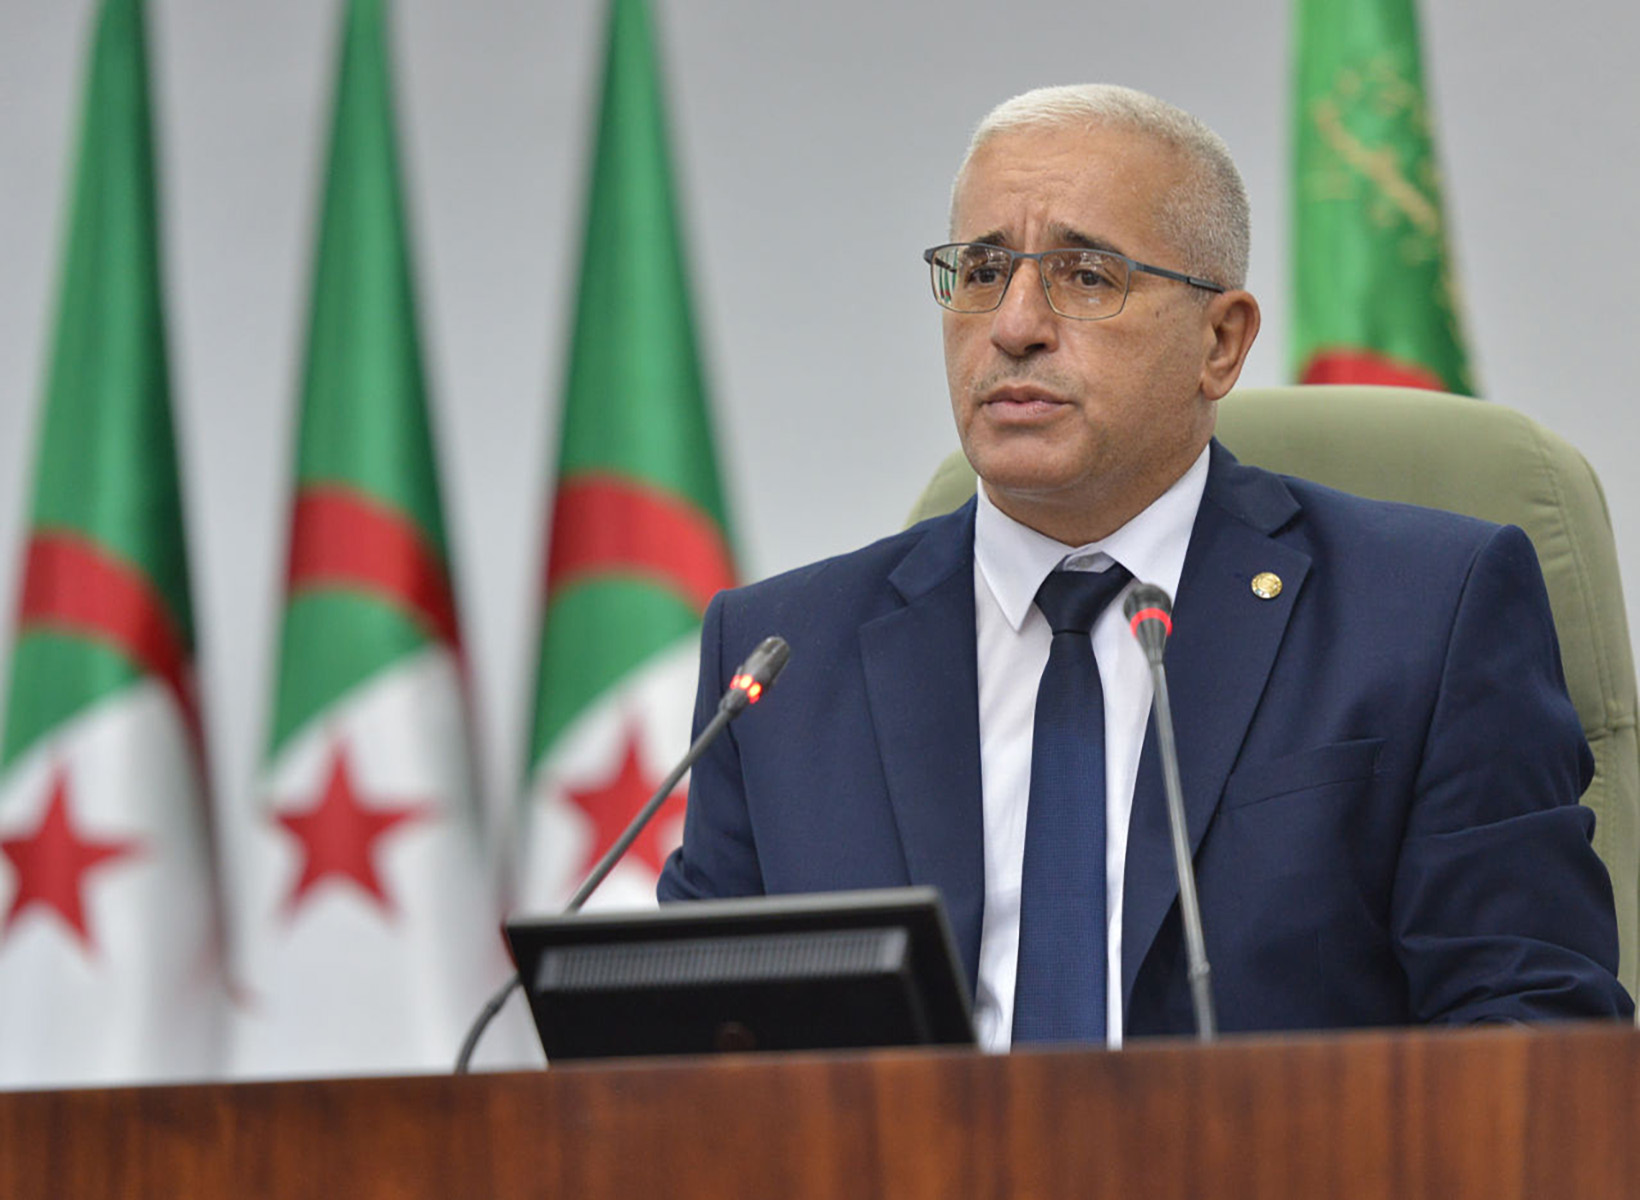 Statement of the PUIC President on the evolving situation  in the Palestinian territories   